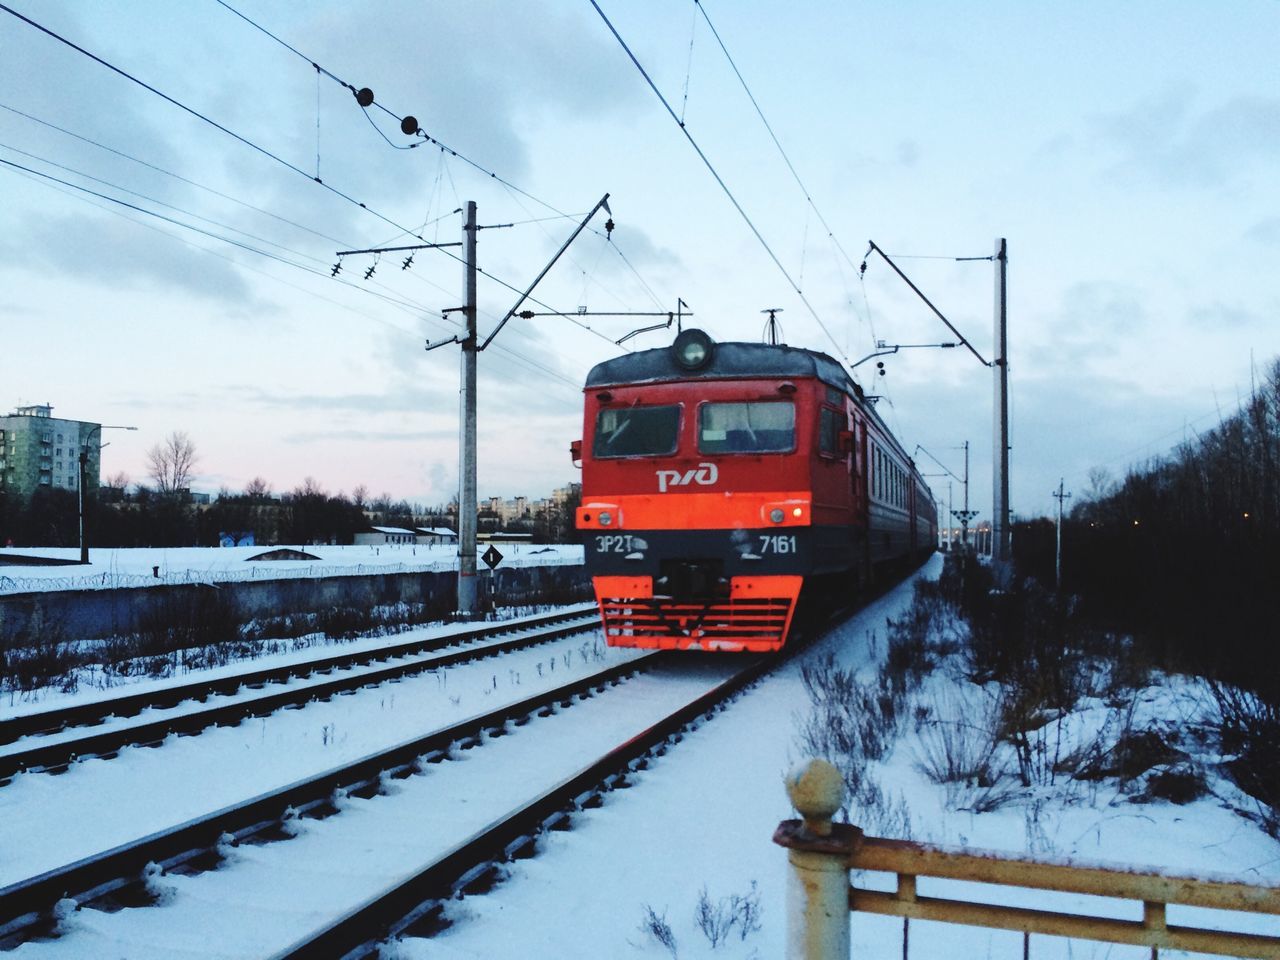 railroad track, transportation, snow, rail transportation, winter, public transportation, electricity pylon, cold temperature, power line, mode of transport, train - vehicle, sky, season, cable, electricity, connection, power supply, weather, railroad station, railroad station platform